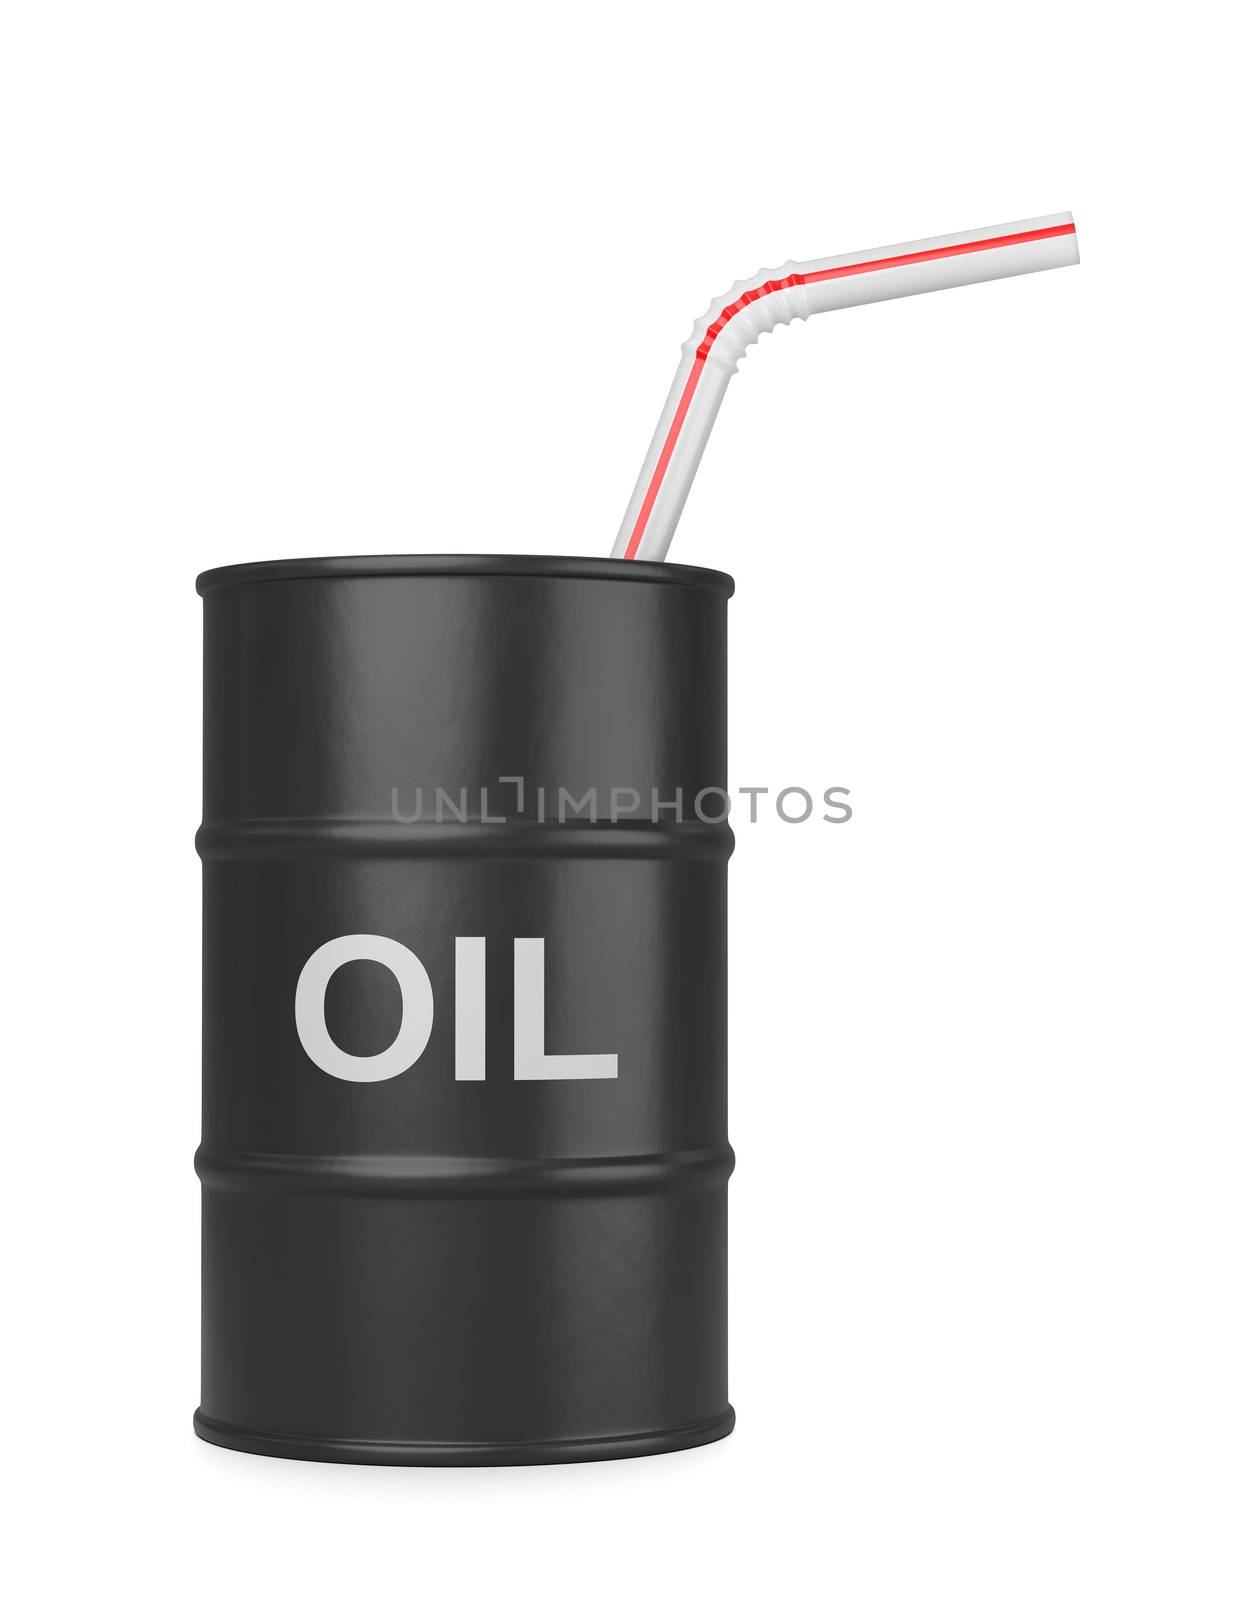 Black Oil Barrel with Drinking Straw Isolated on White Background 3D Illustration